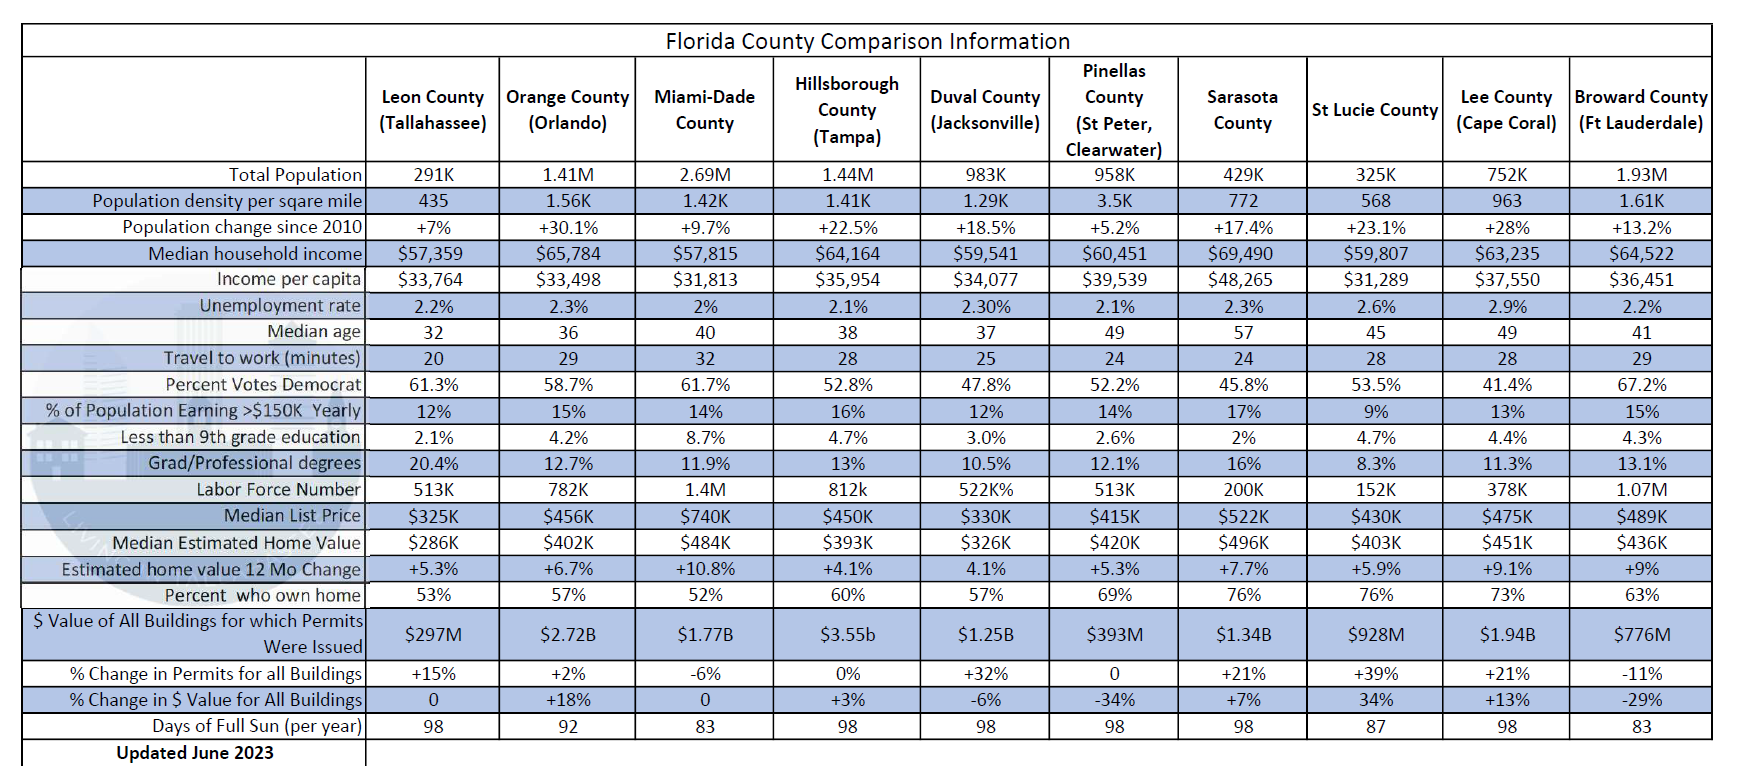 This table compares demographics and publicly available information across the ten largest counties in Florida